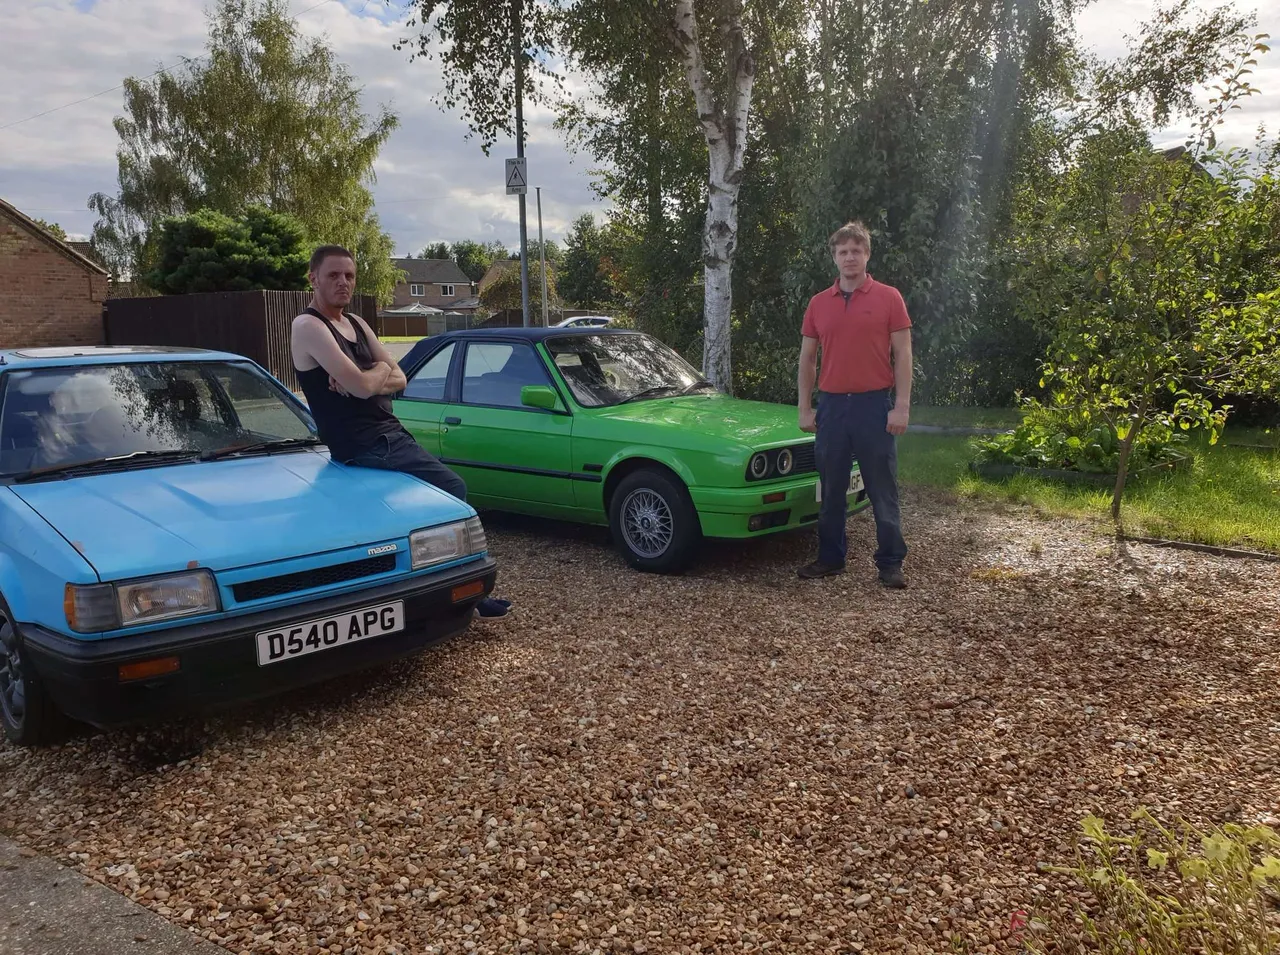 Me and Alex with our respective cars.